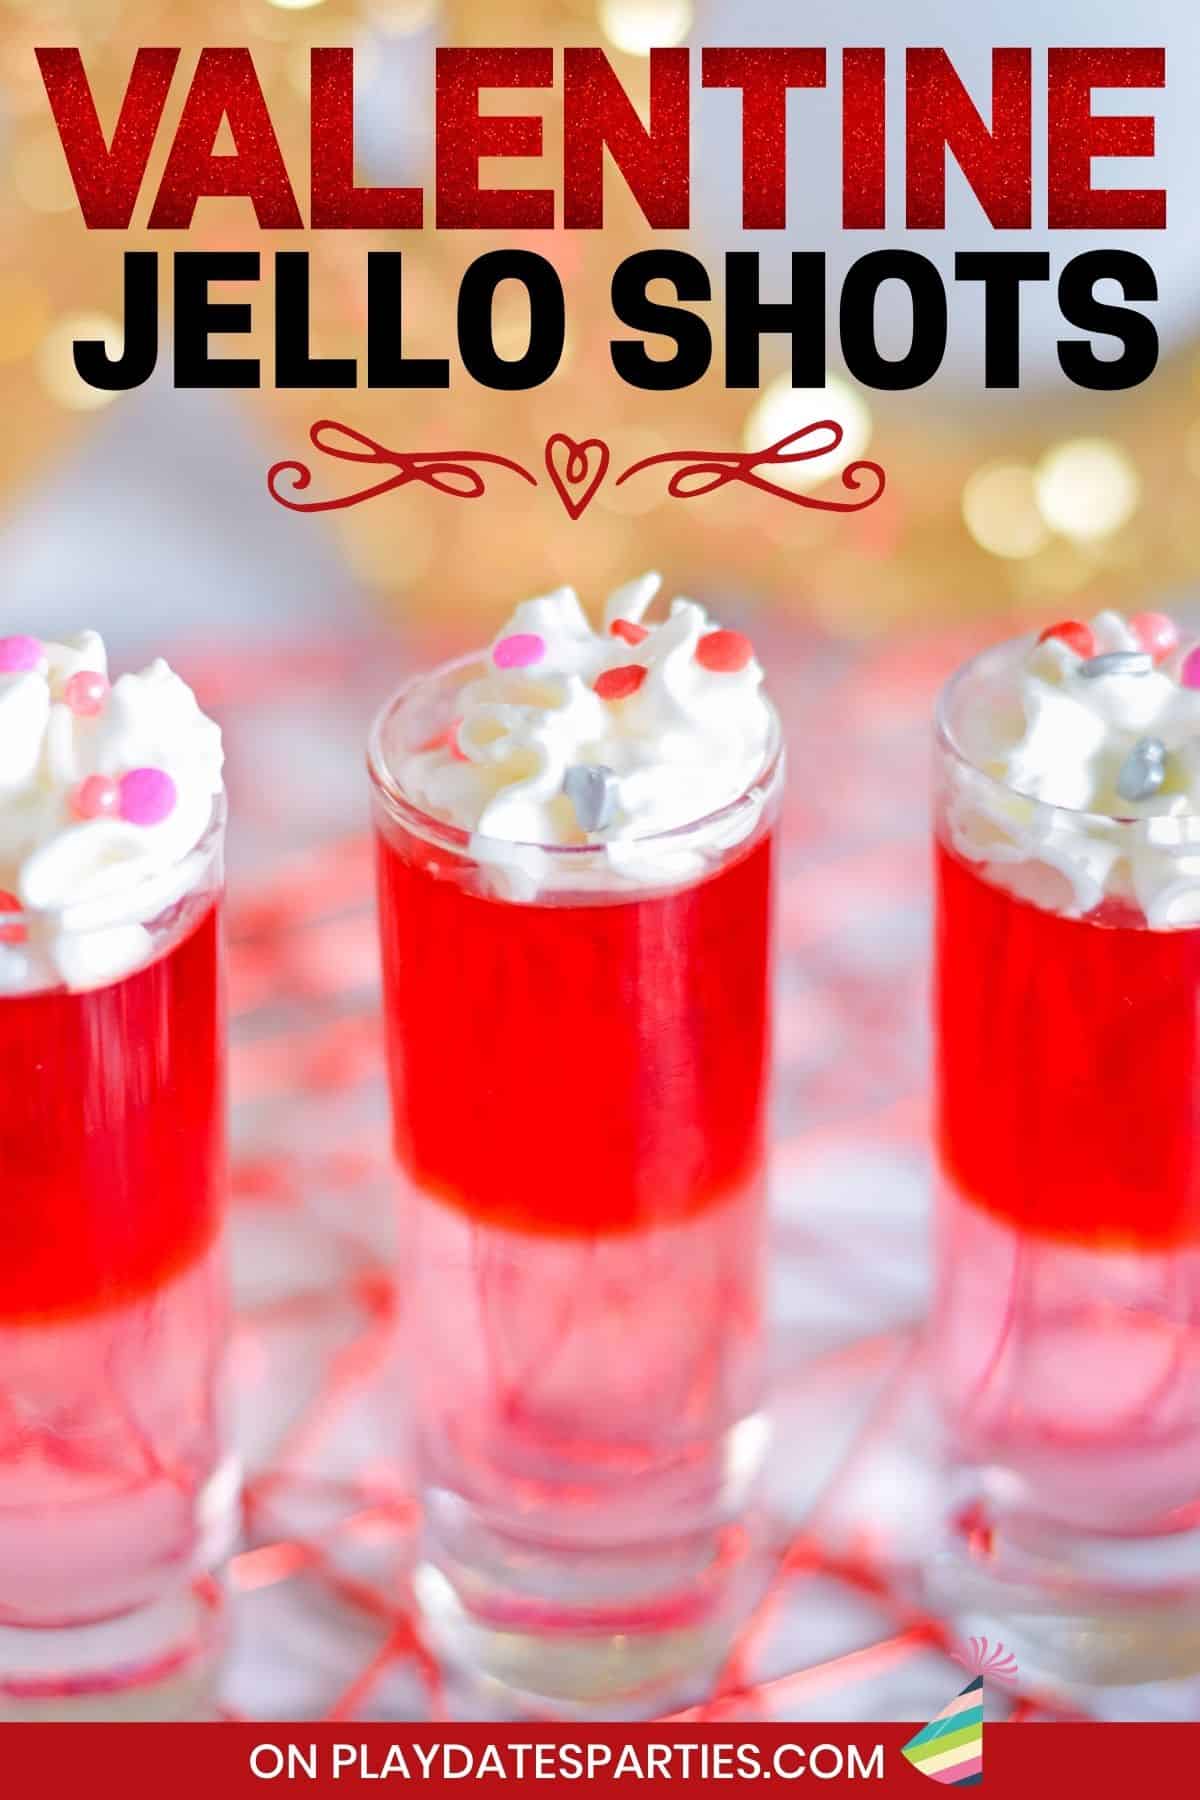 Close up of finished jello shots with text Valentine jello shots.